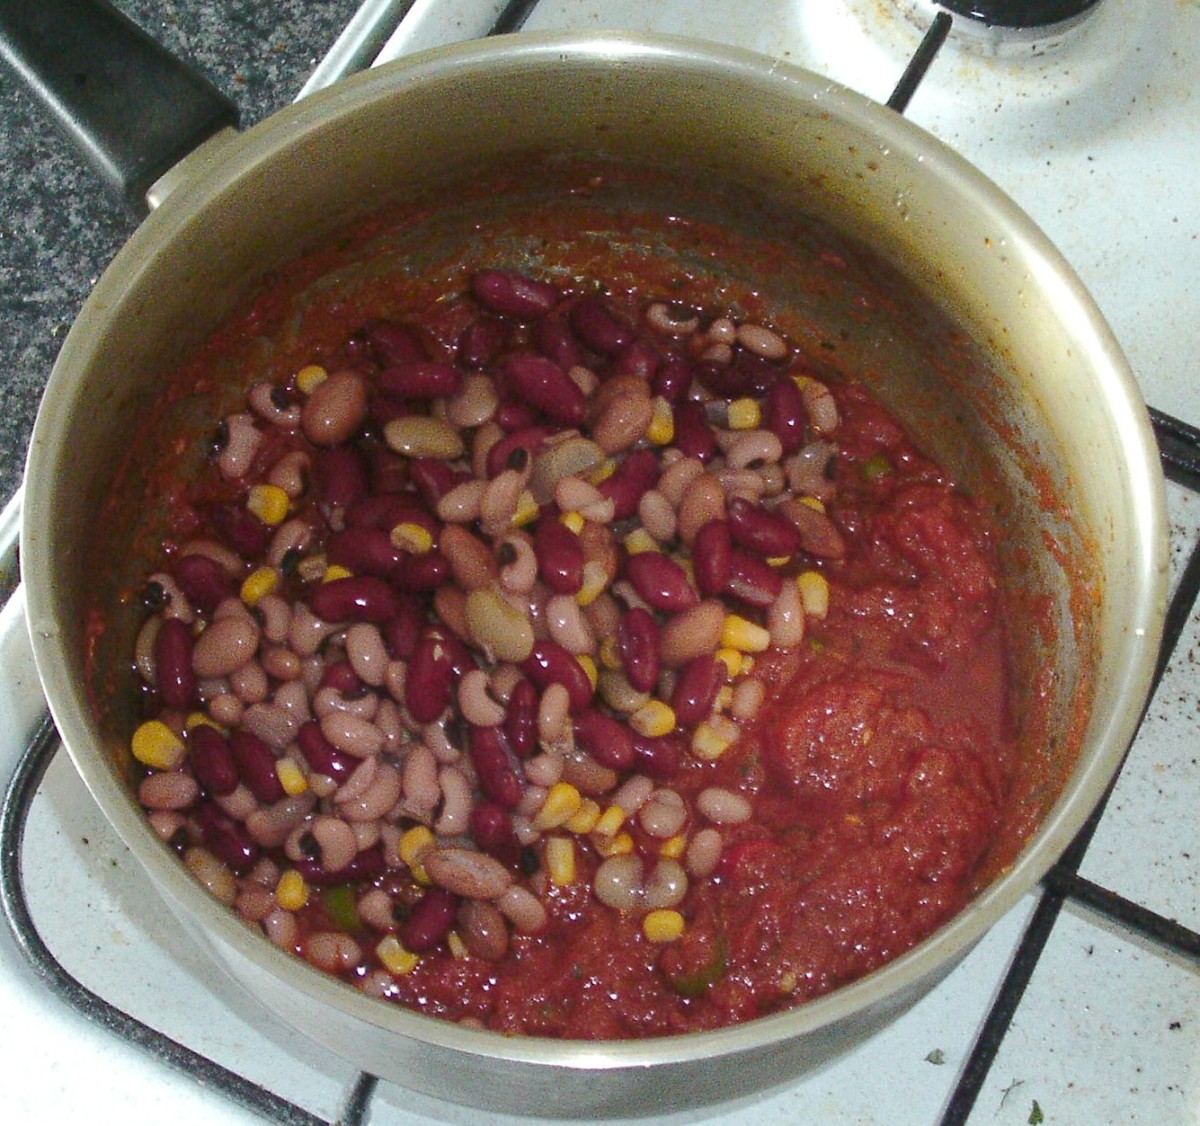 Add rinsed and drained beans to the spicy tomato sauce